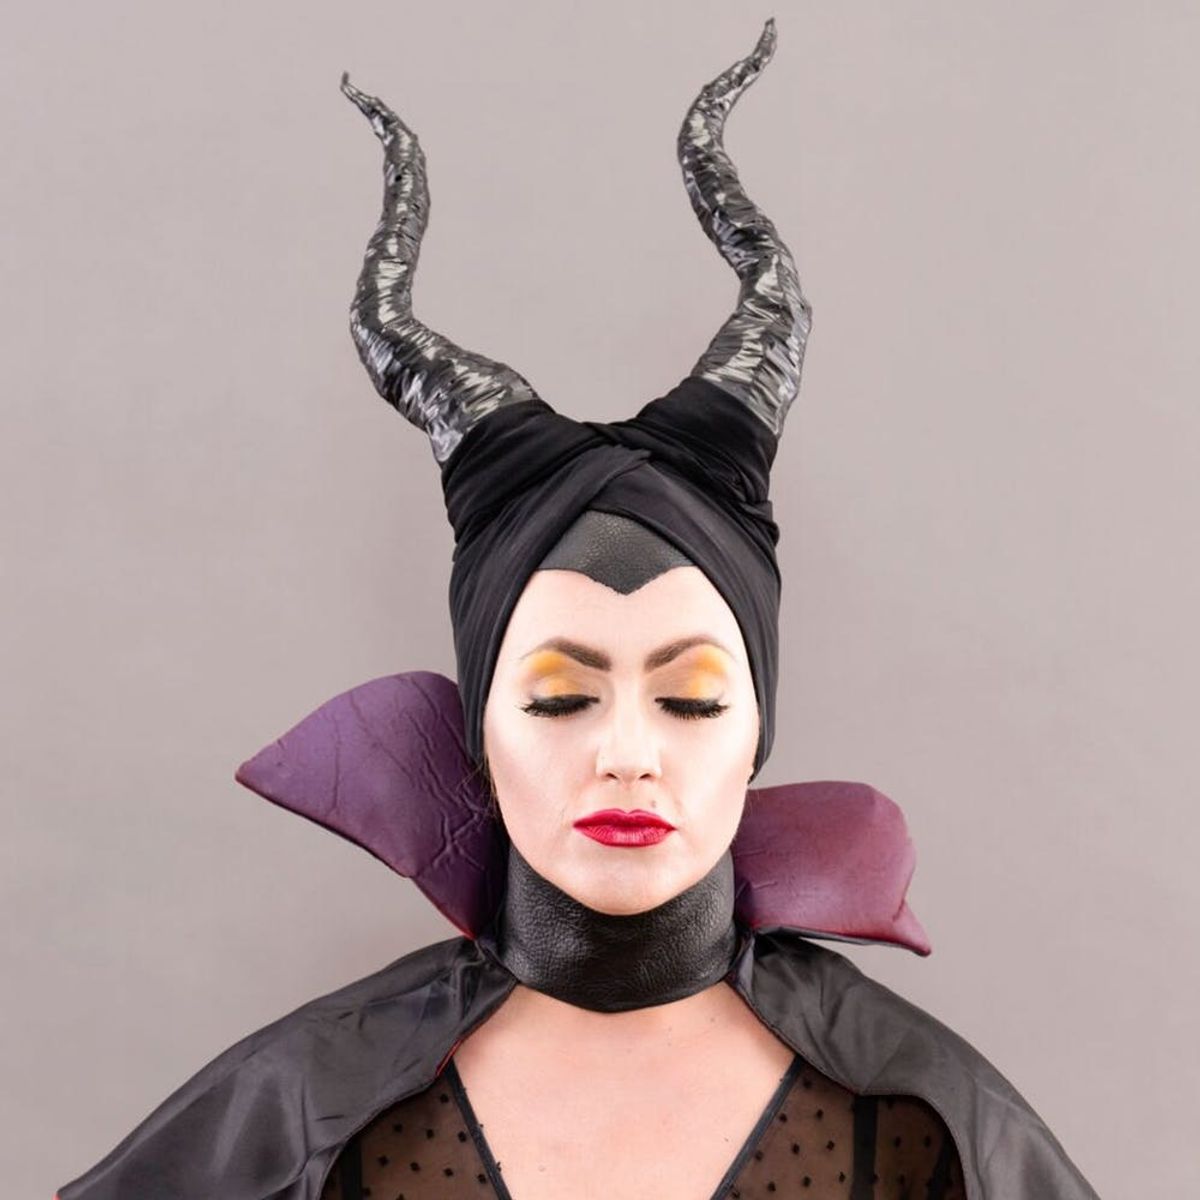 Forget About Princesses — This DIY Maleficent Costume Will Help You Slay Halloween